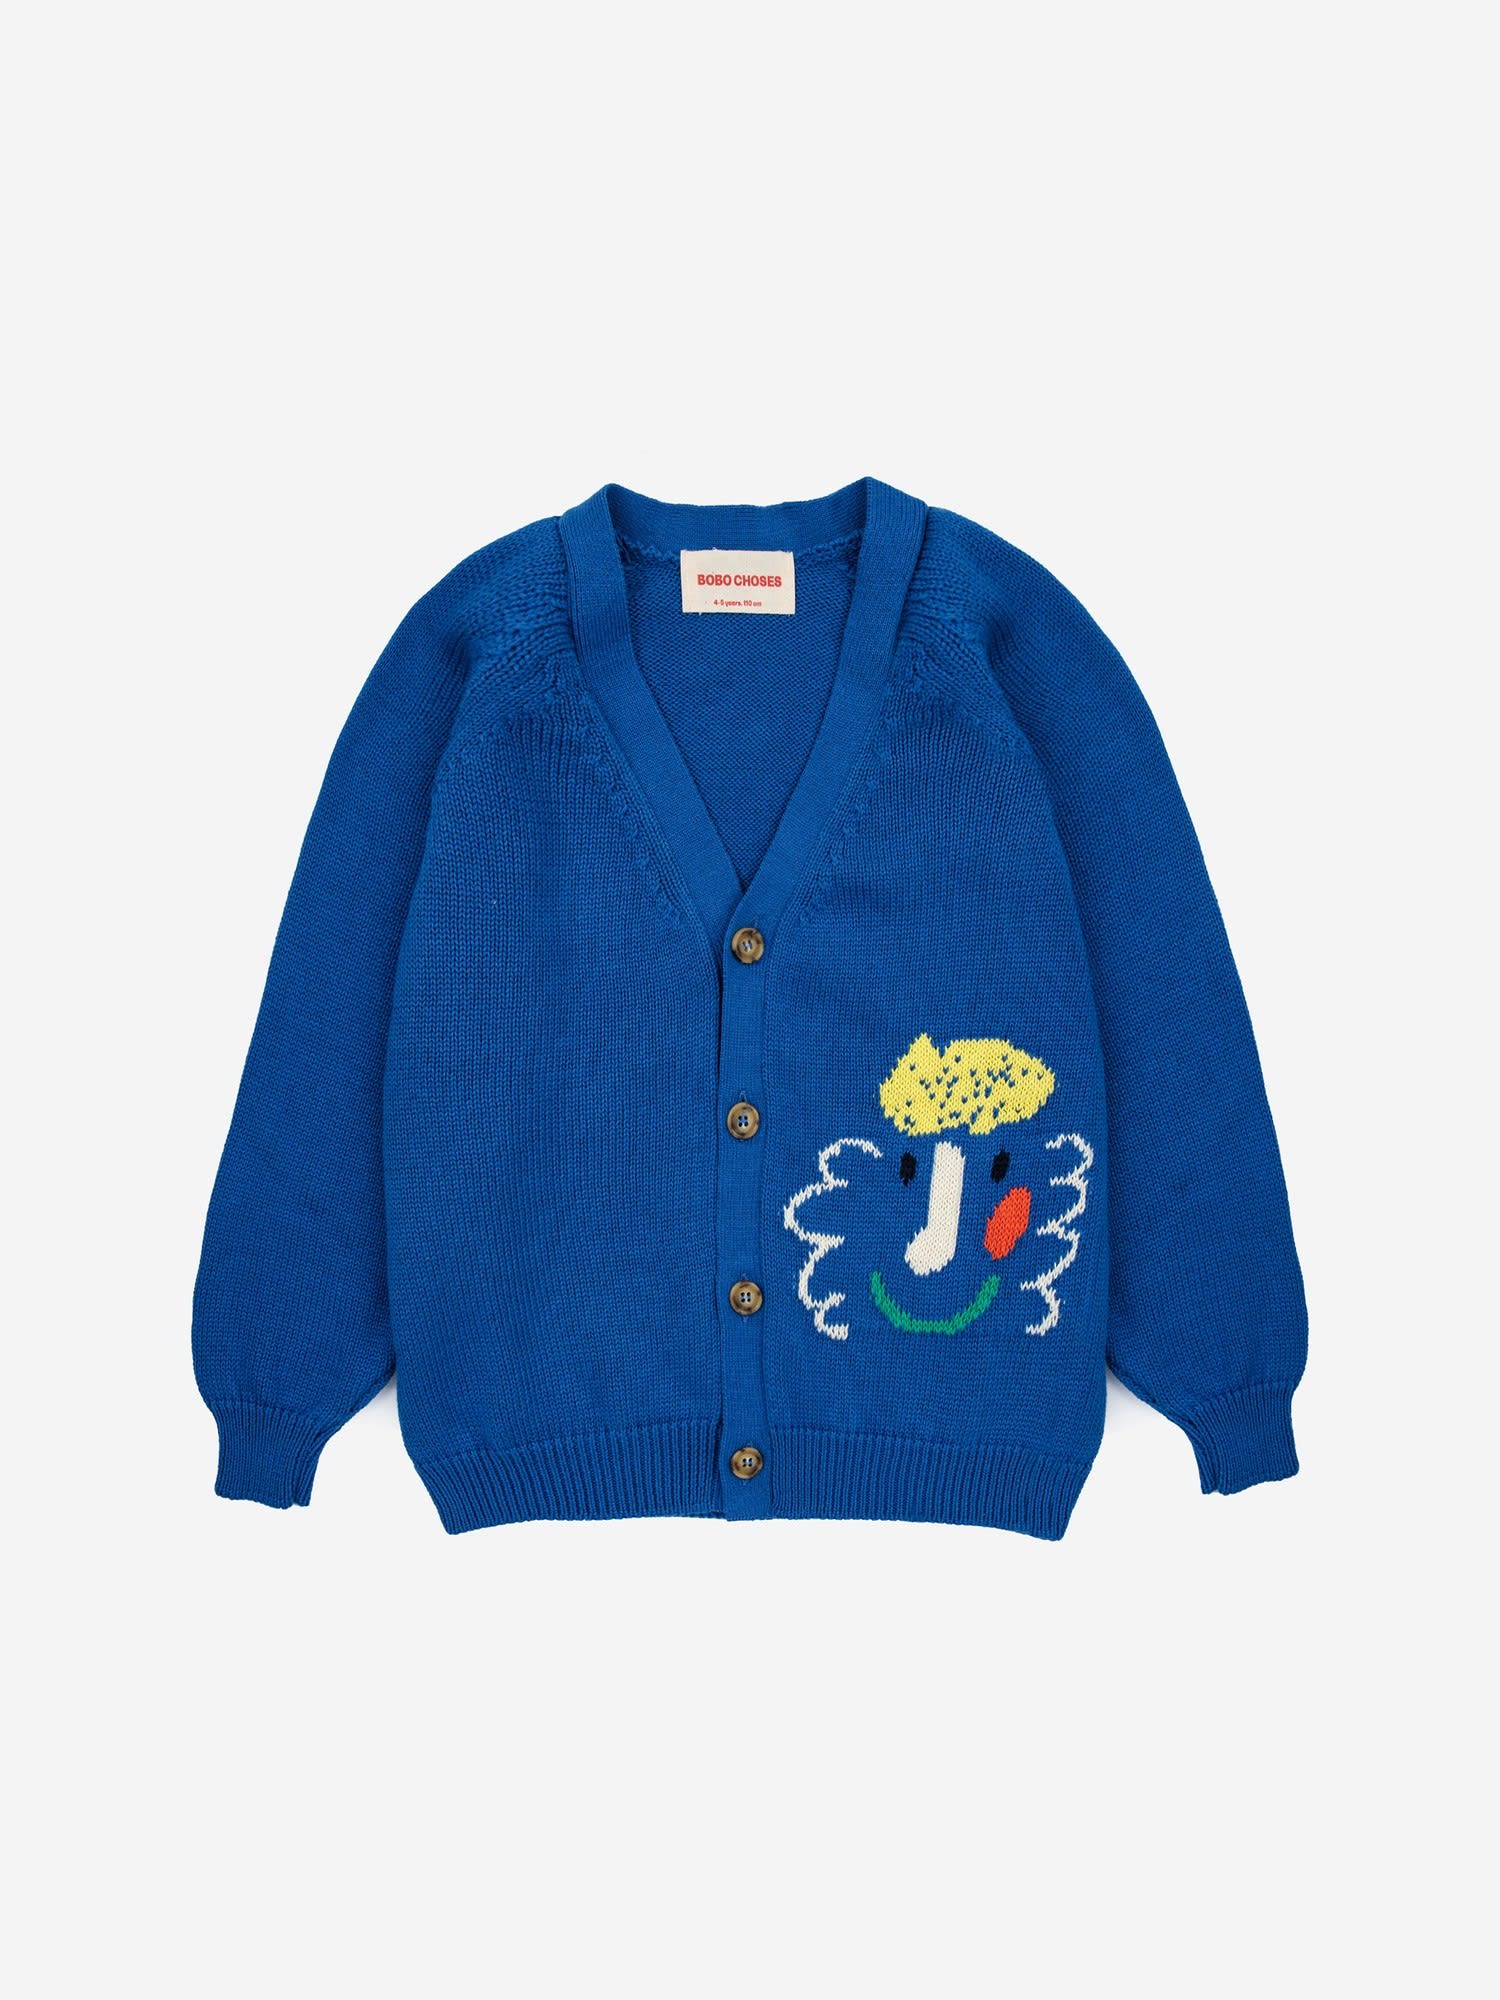 Bobo Choses Blue Cardigan For Kids With Embroidered Pattern